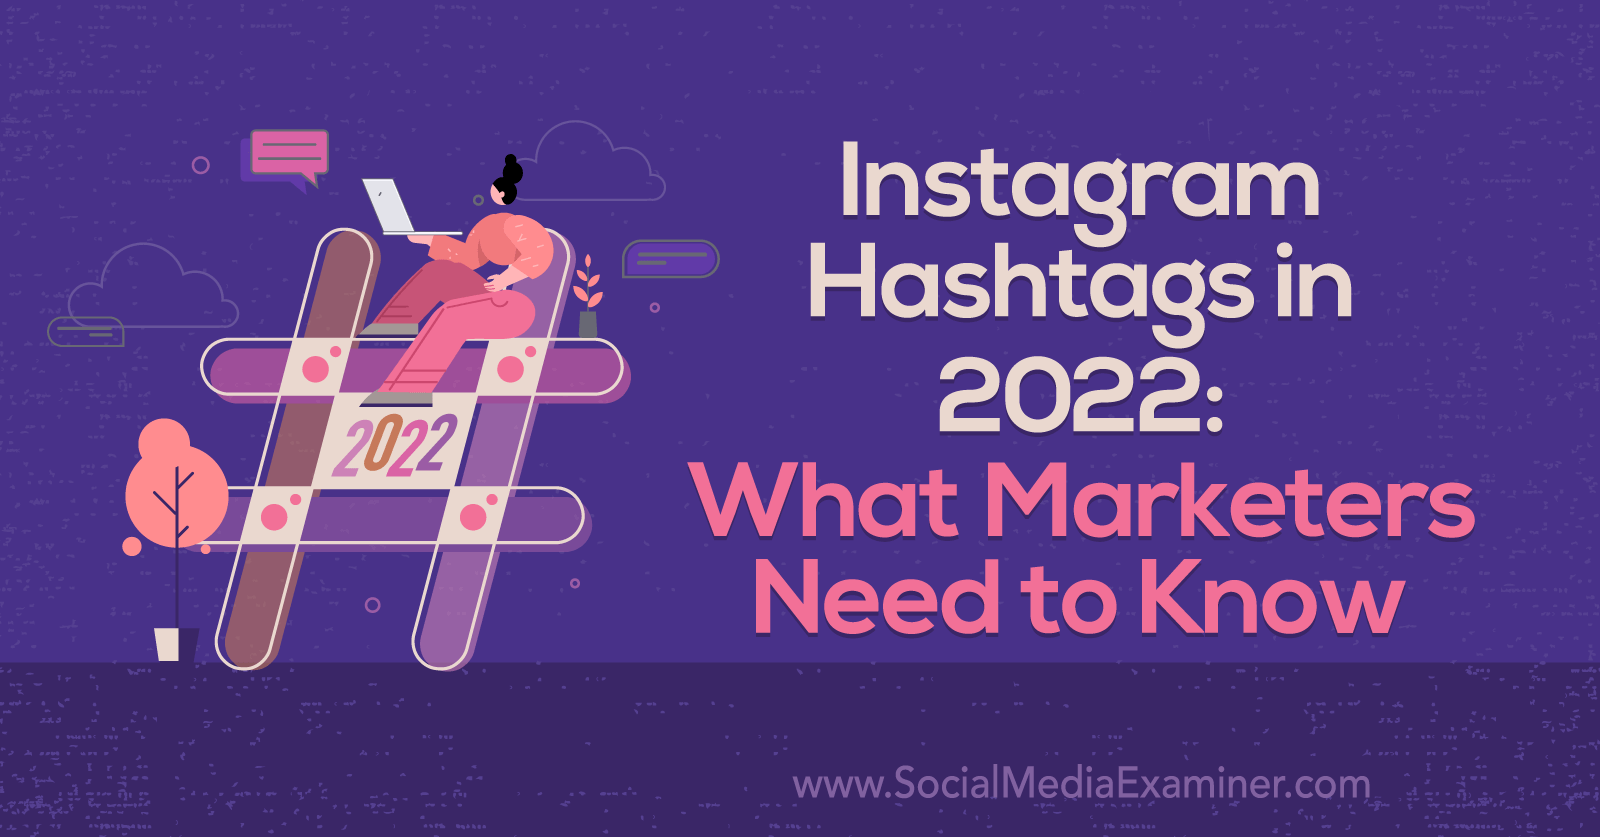 Instagram Hashtags in 2022: What Marketers Need to Know by Corinna Keefe